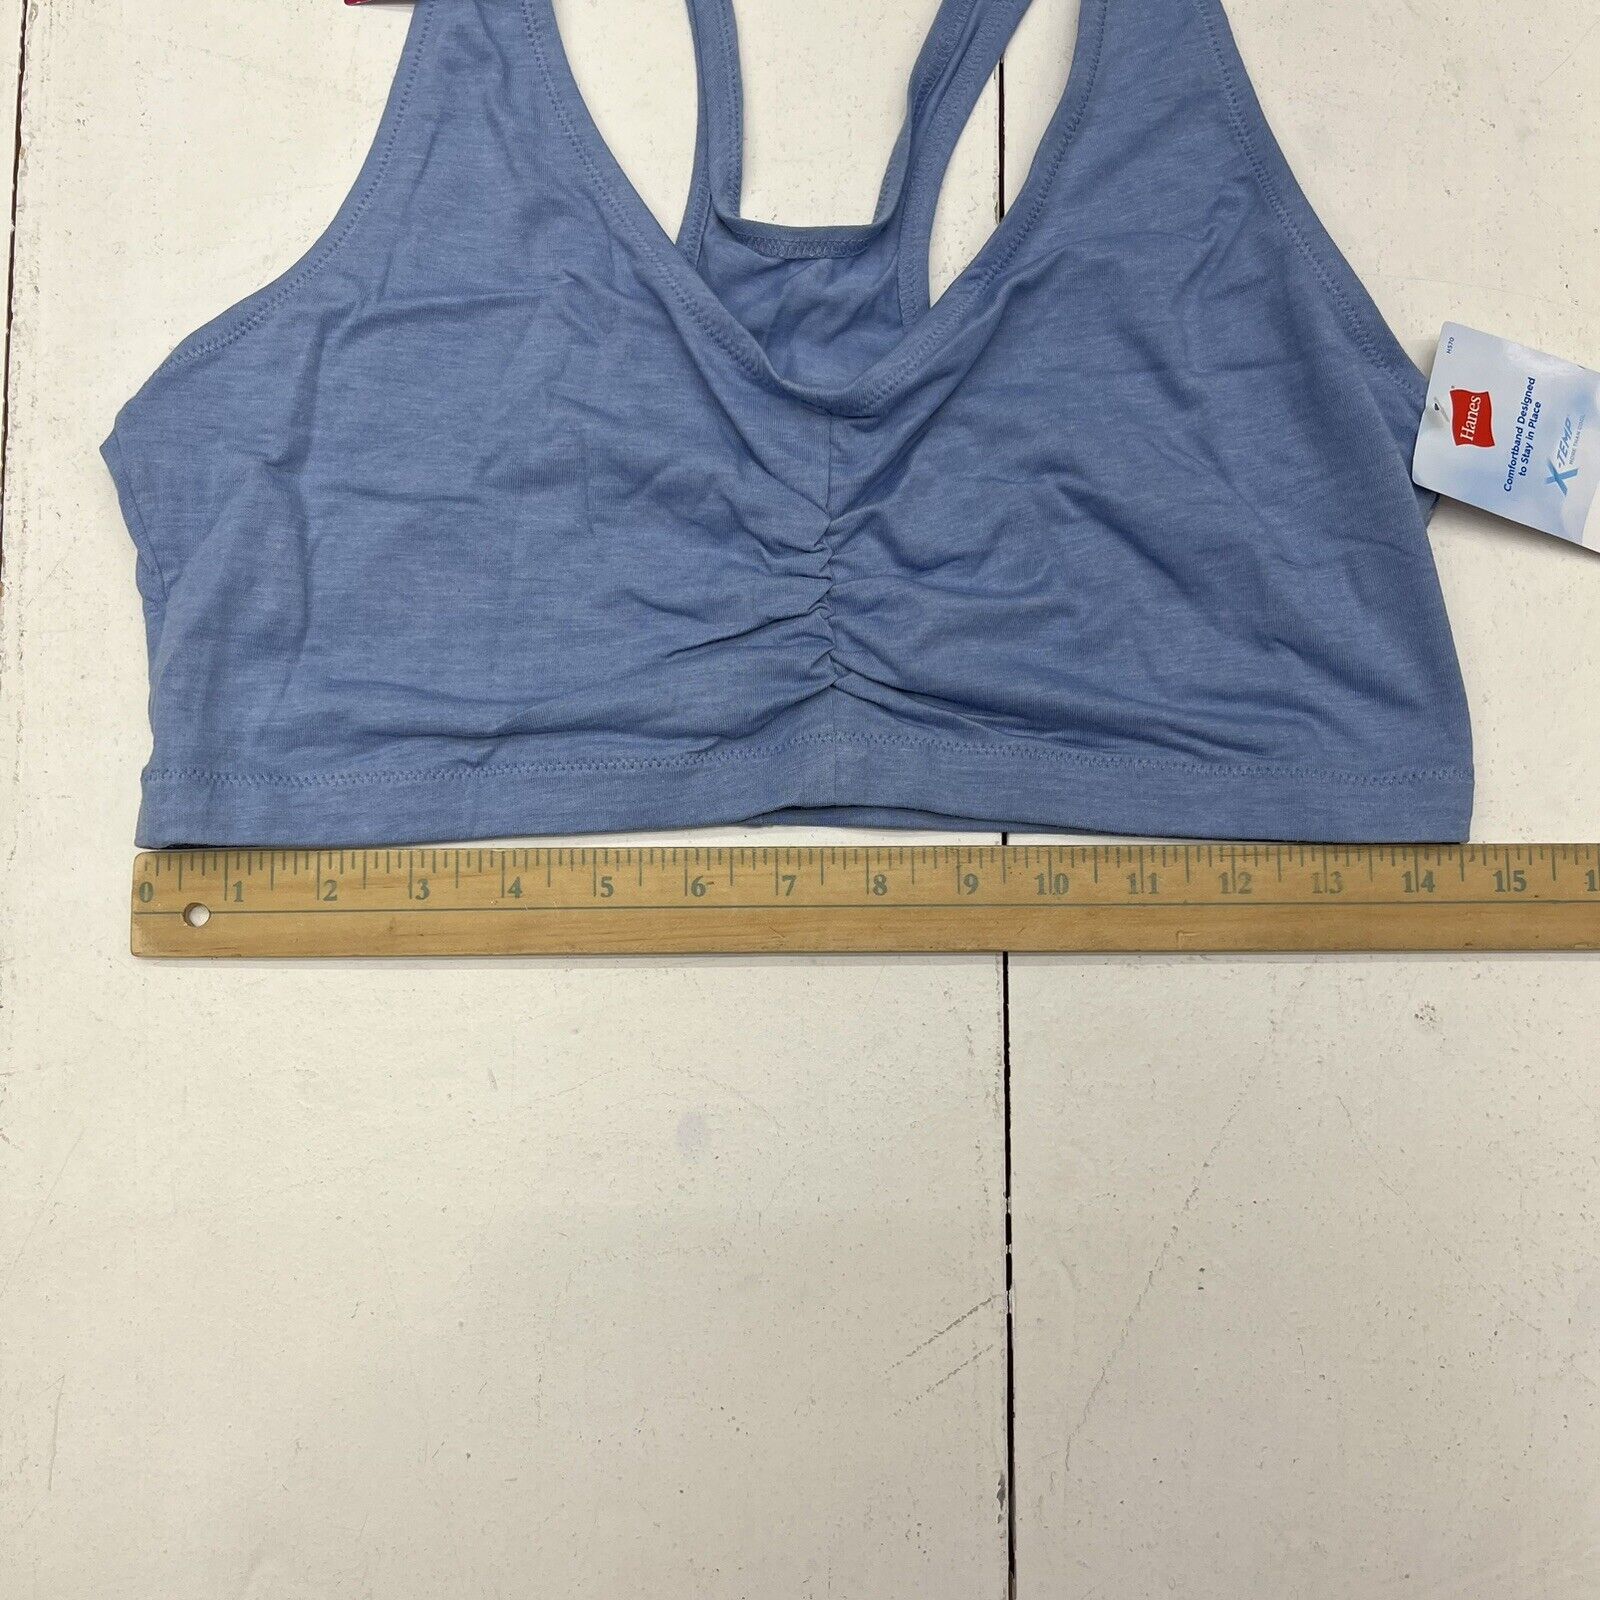 Hanes, Other, Hanes Training Bras Size L